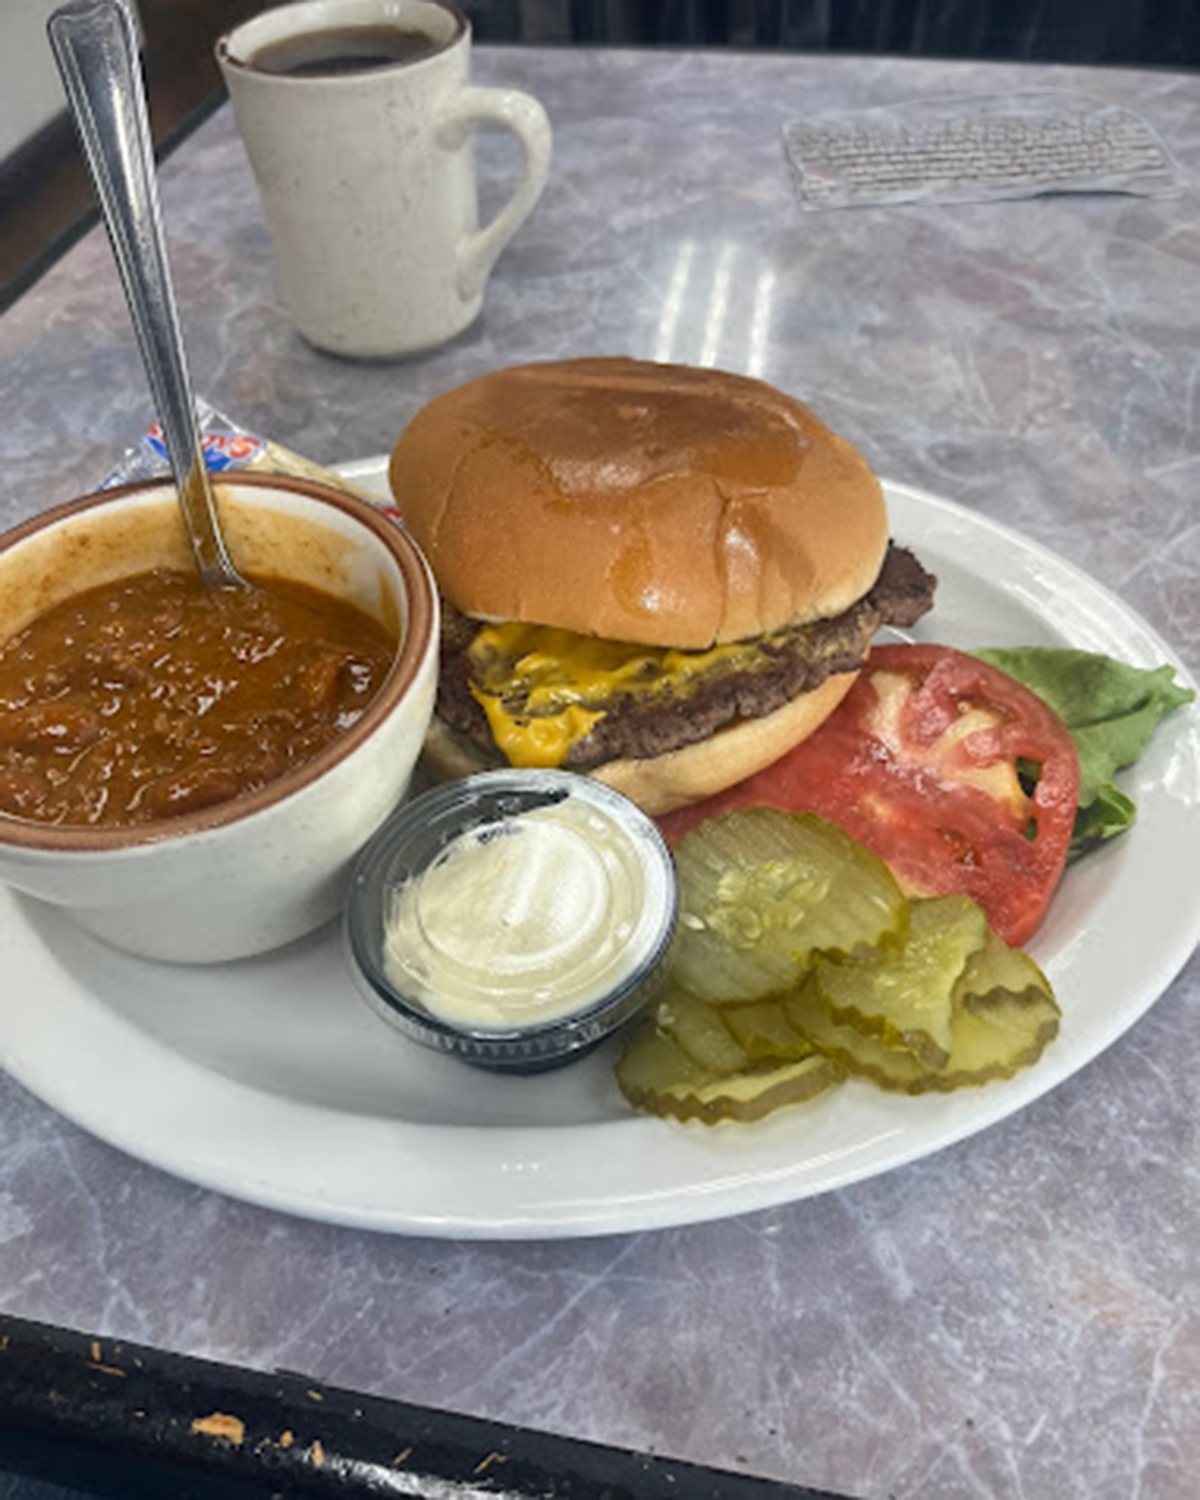 A handmade burger and cup of chili from Cranberries Family Restaurant